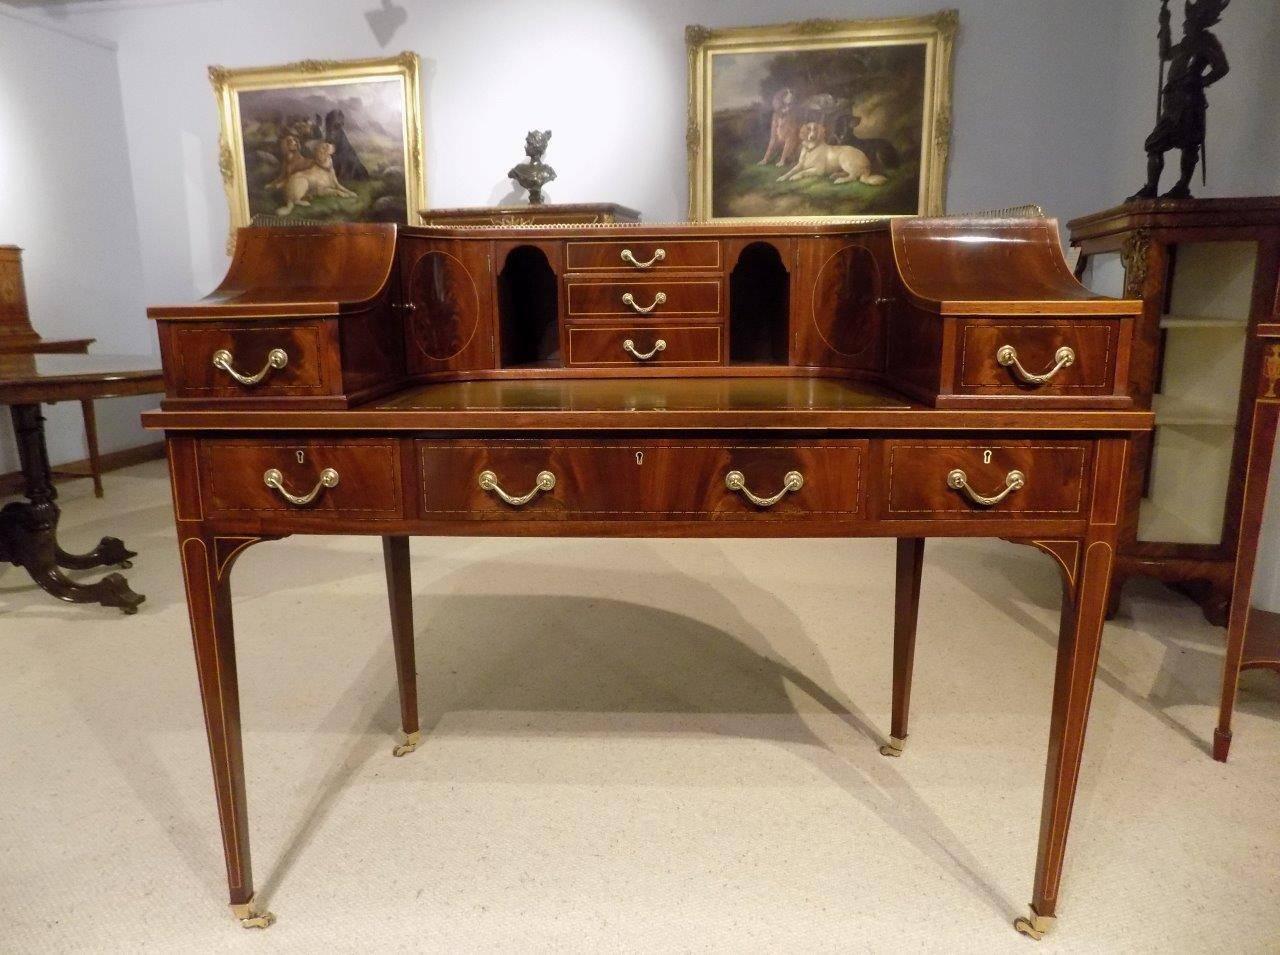 A fine quality Edwardian period flamed mahogany carlton house desk. The upper section with a brass shaped gallery above the mahogany curved top with flamed mahogany shaped panels and having an inset green blind and gilt tooled leather writing